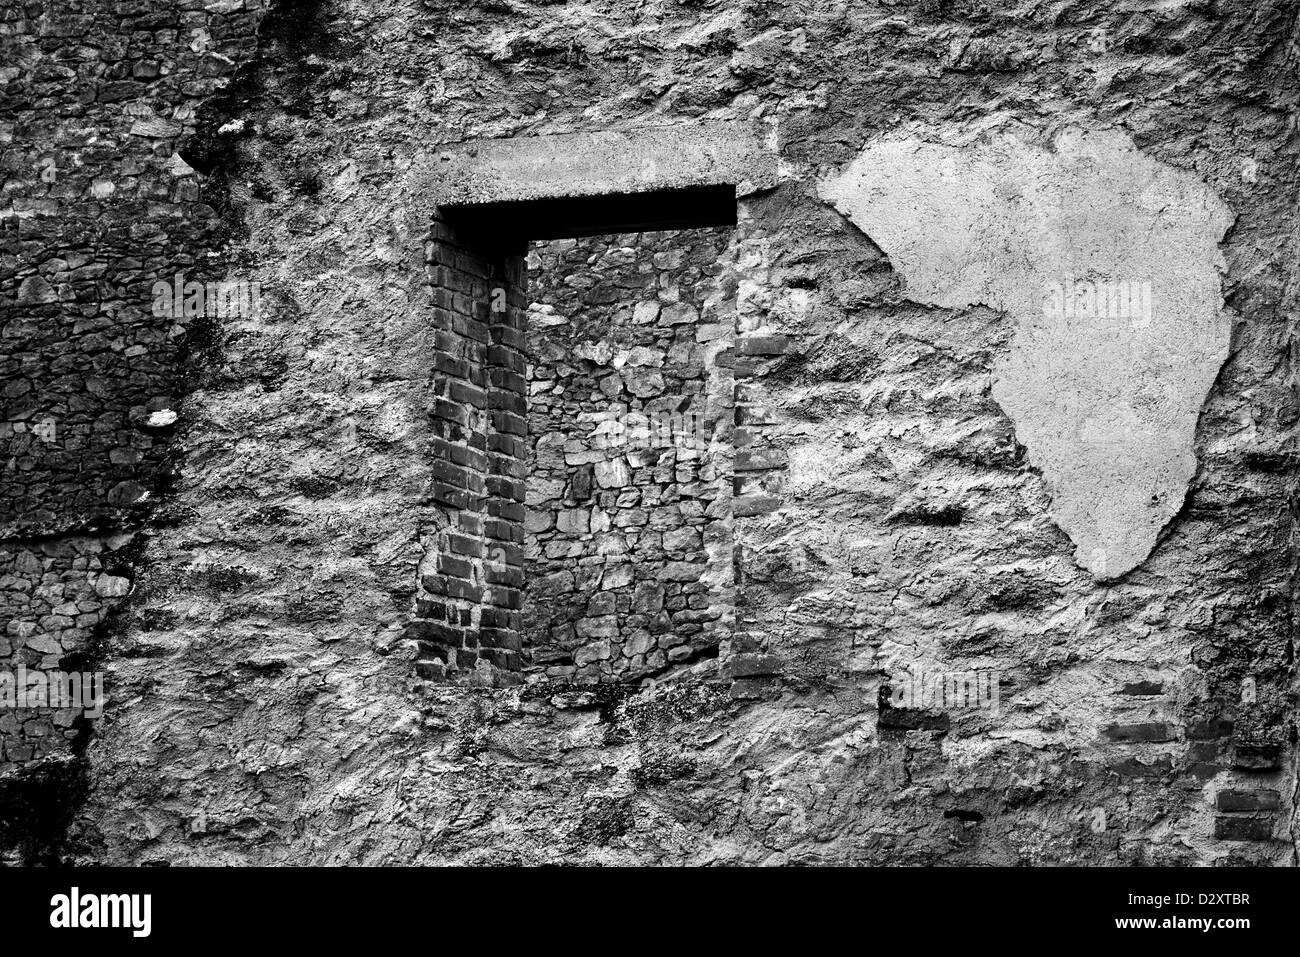 Damaged brick and stone wall and window, black and white showing lots of textures Stock Photo